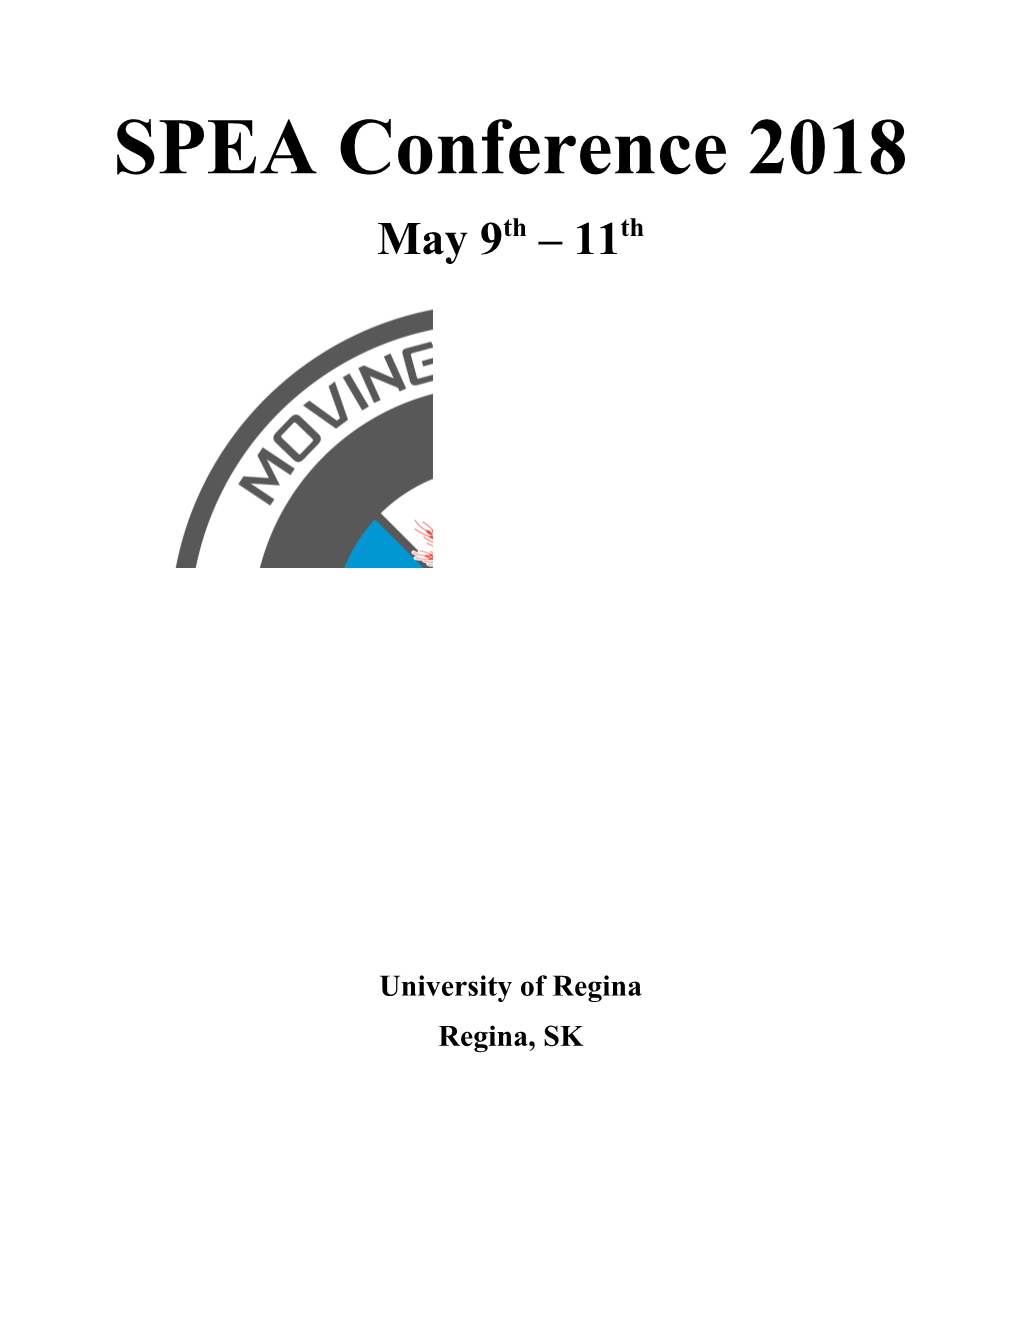 SPEA Conference 2018